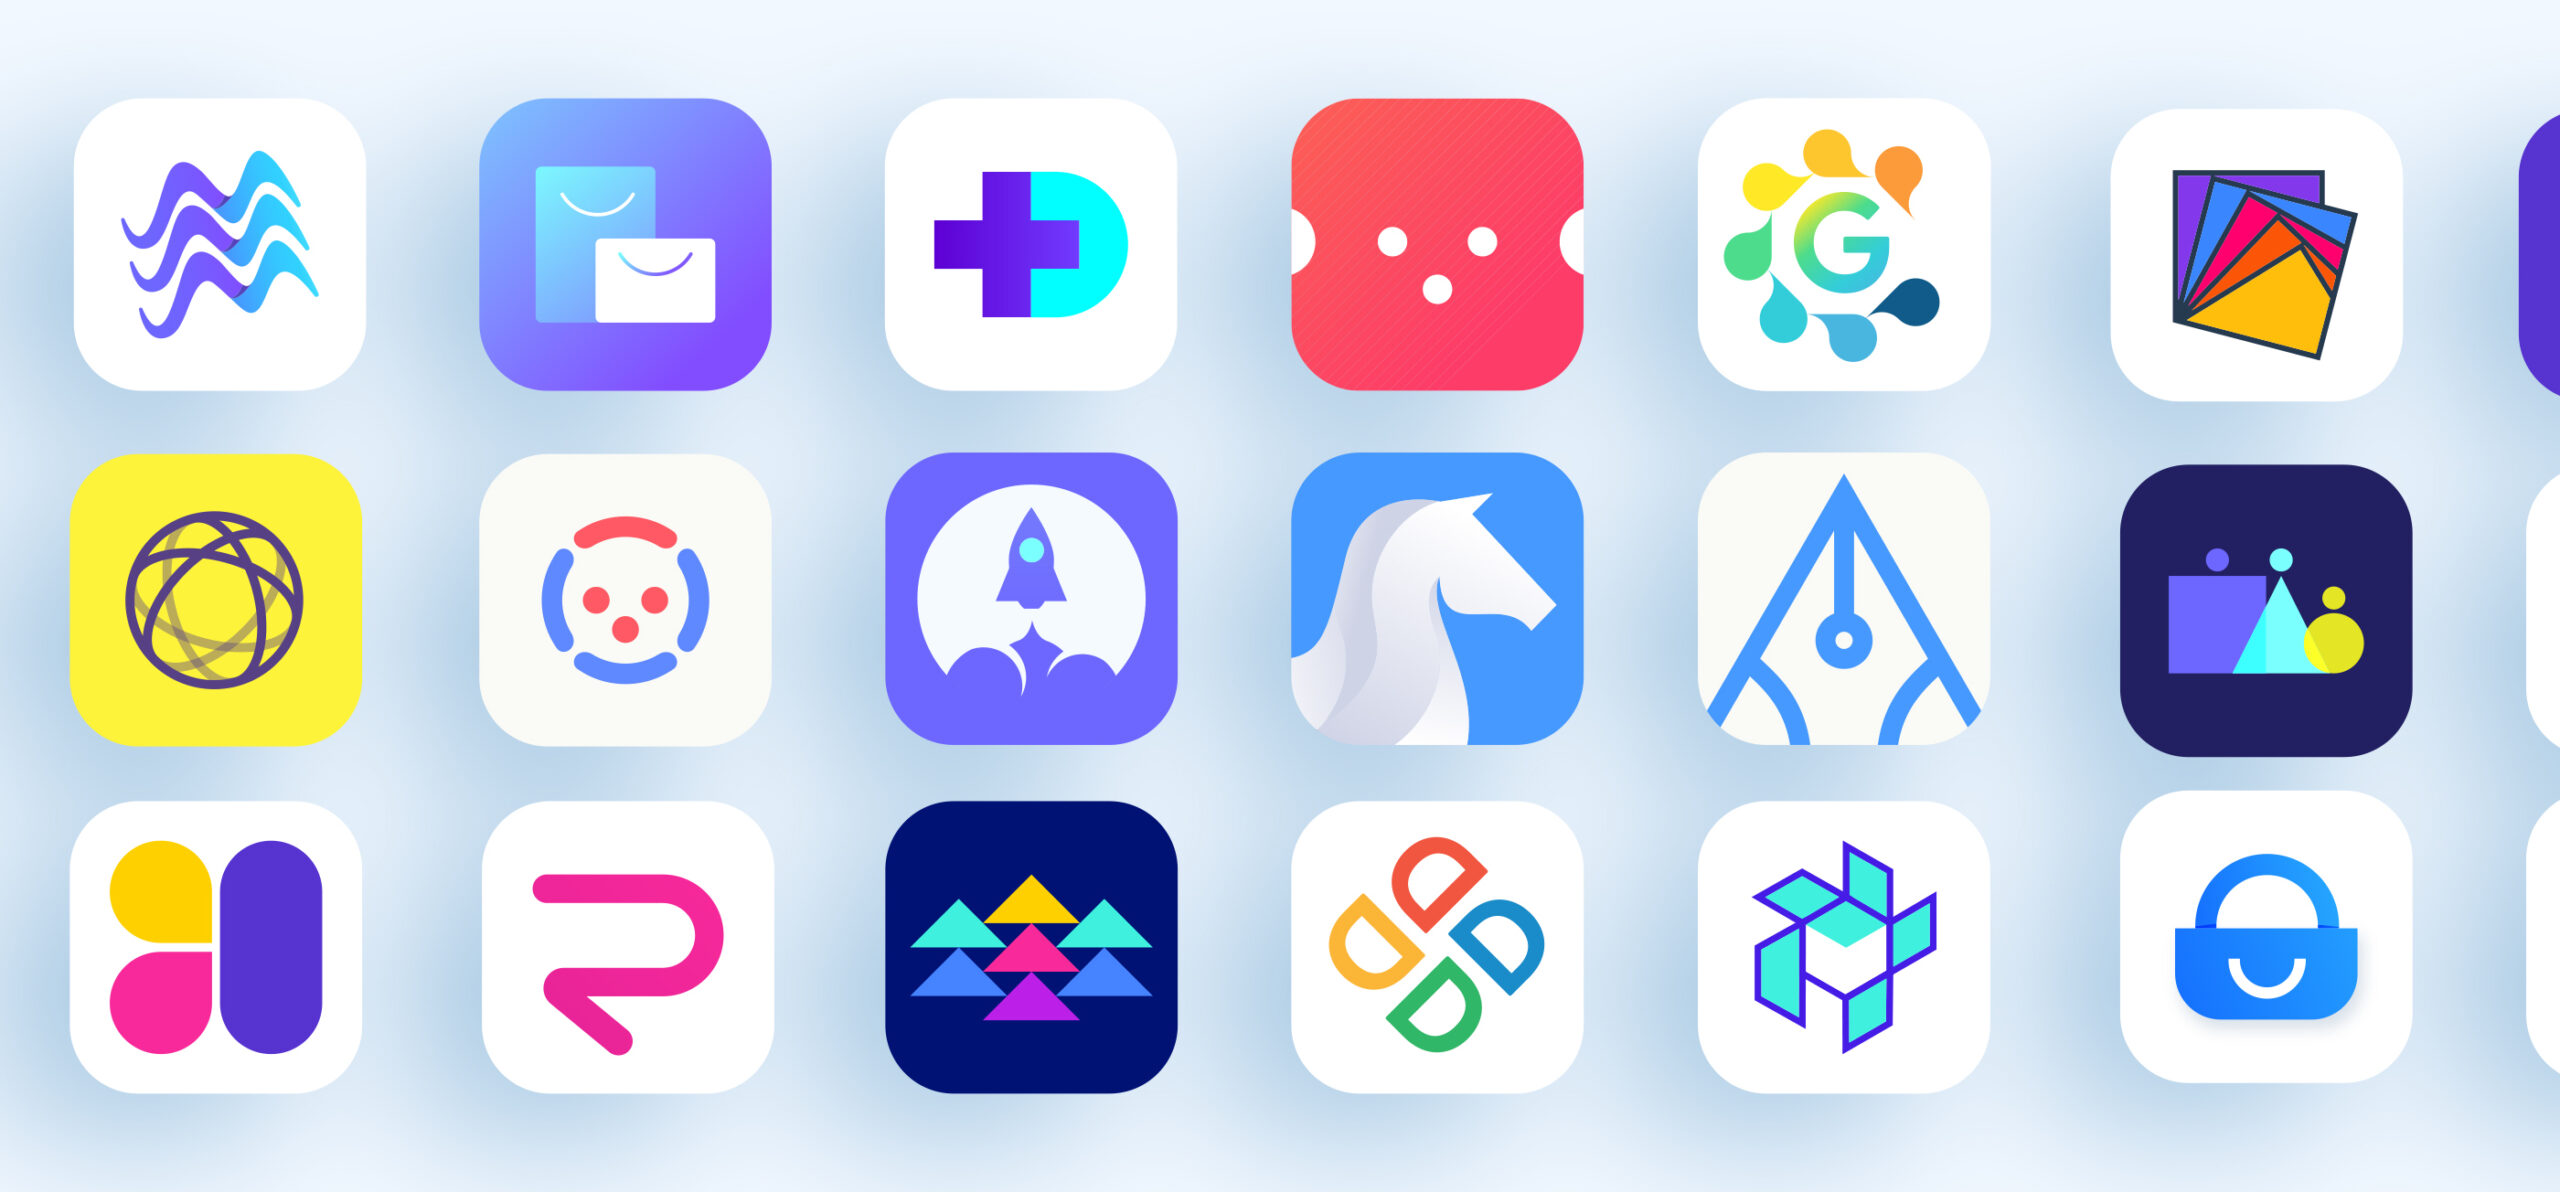 Use collections of App Icons1